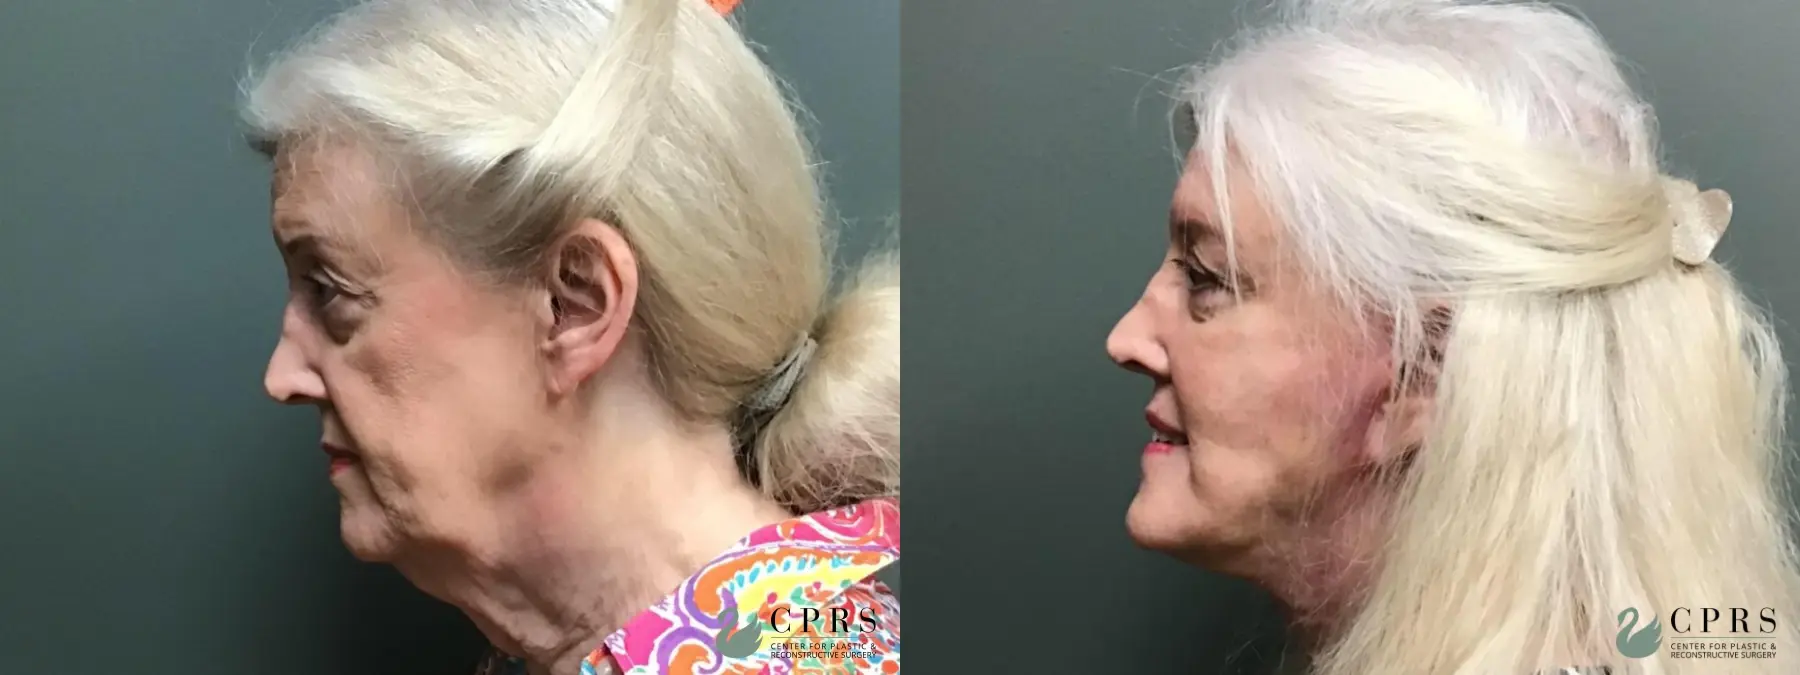 Facelift & Neck Lift: Patient 3 - Before and After 2